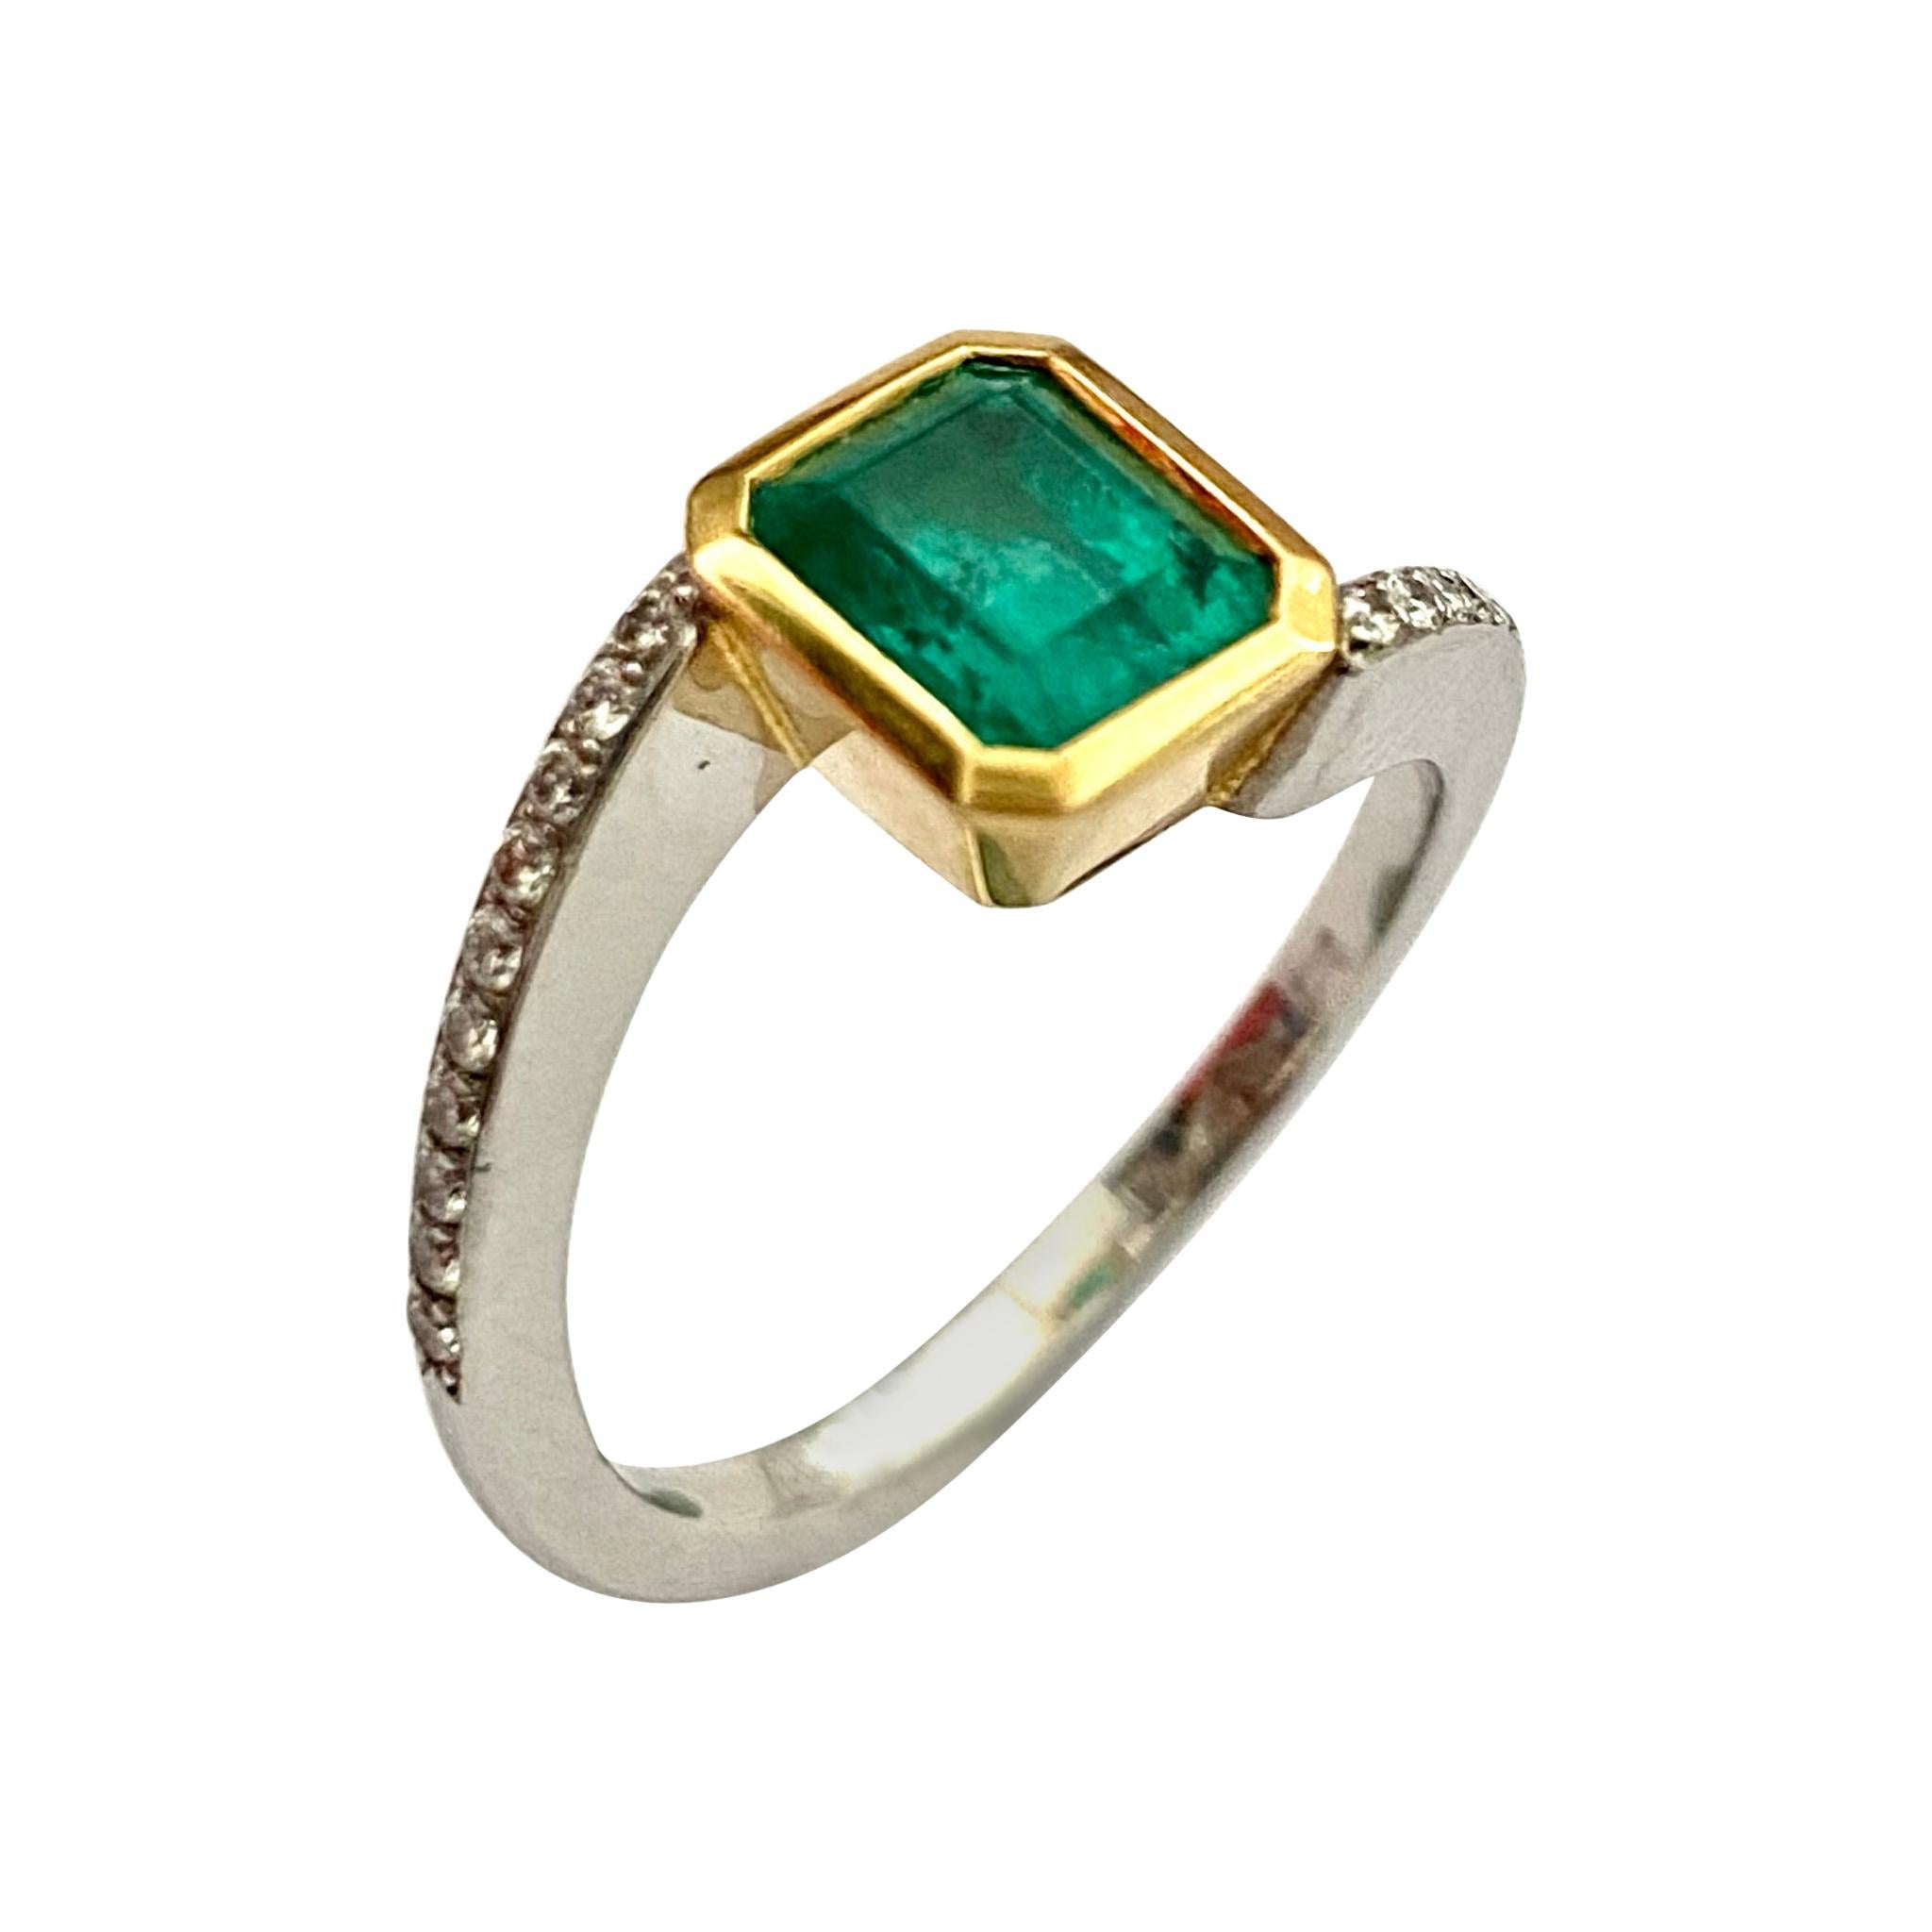 Colombia Emerald of 1.30 Ct and Diamonds Sert in a 18K, Gold Hand Made Ring